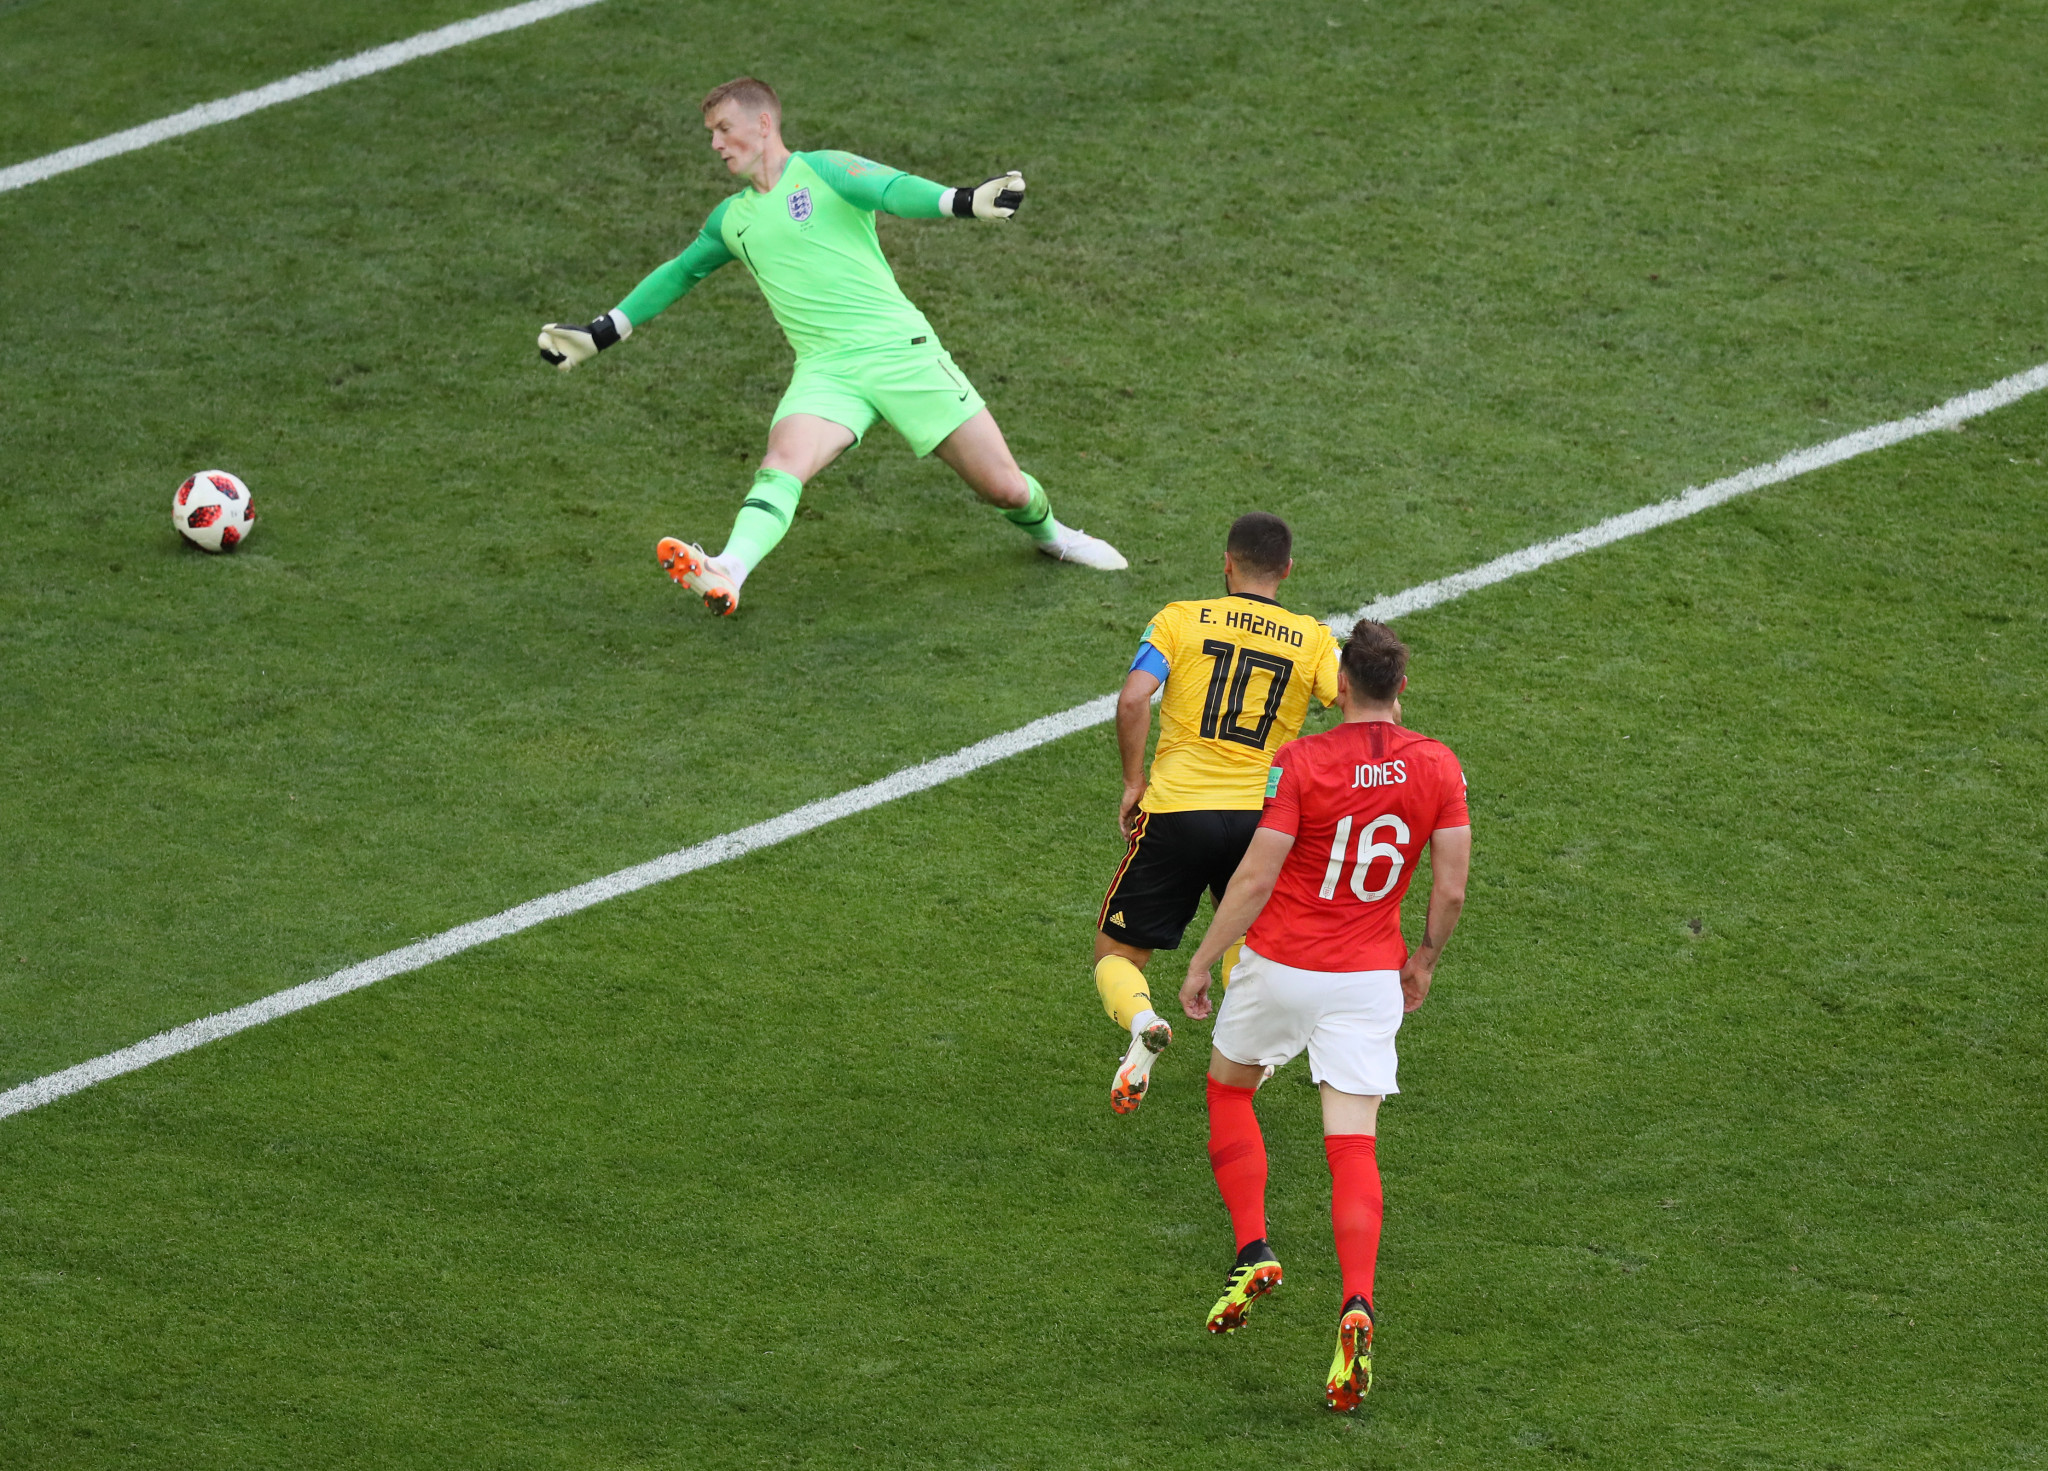 Eden Hazard scored Belgium's second goal to seal their best finish at a FIFA World Cup ©Getty Images